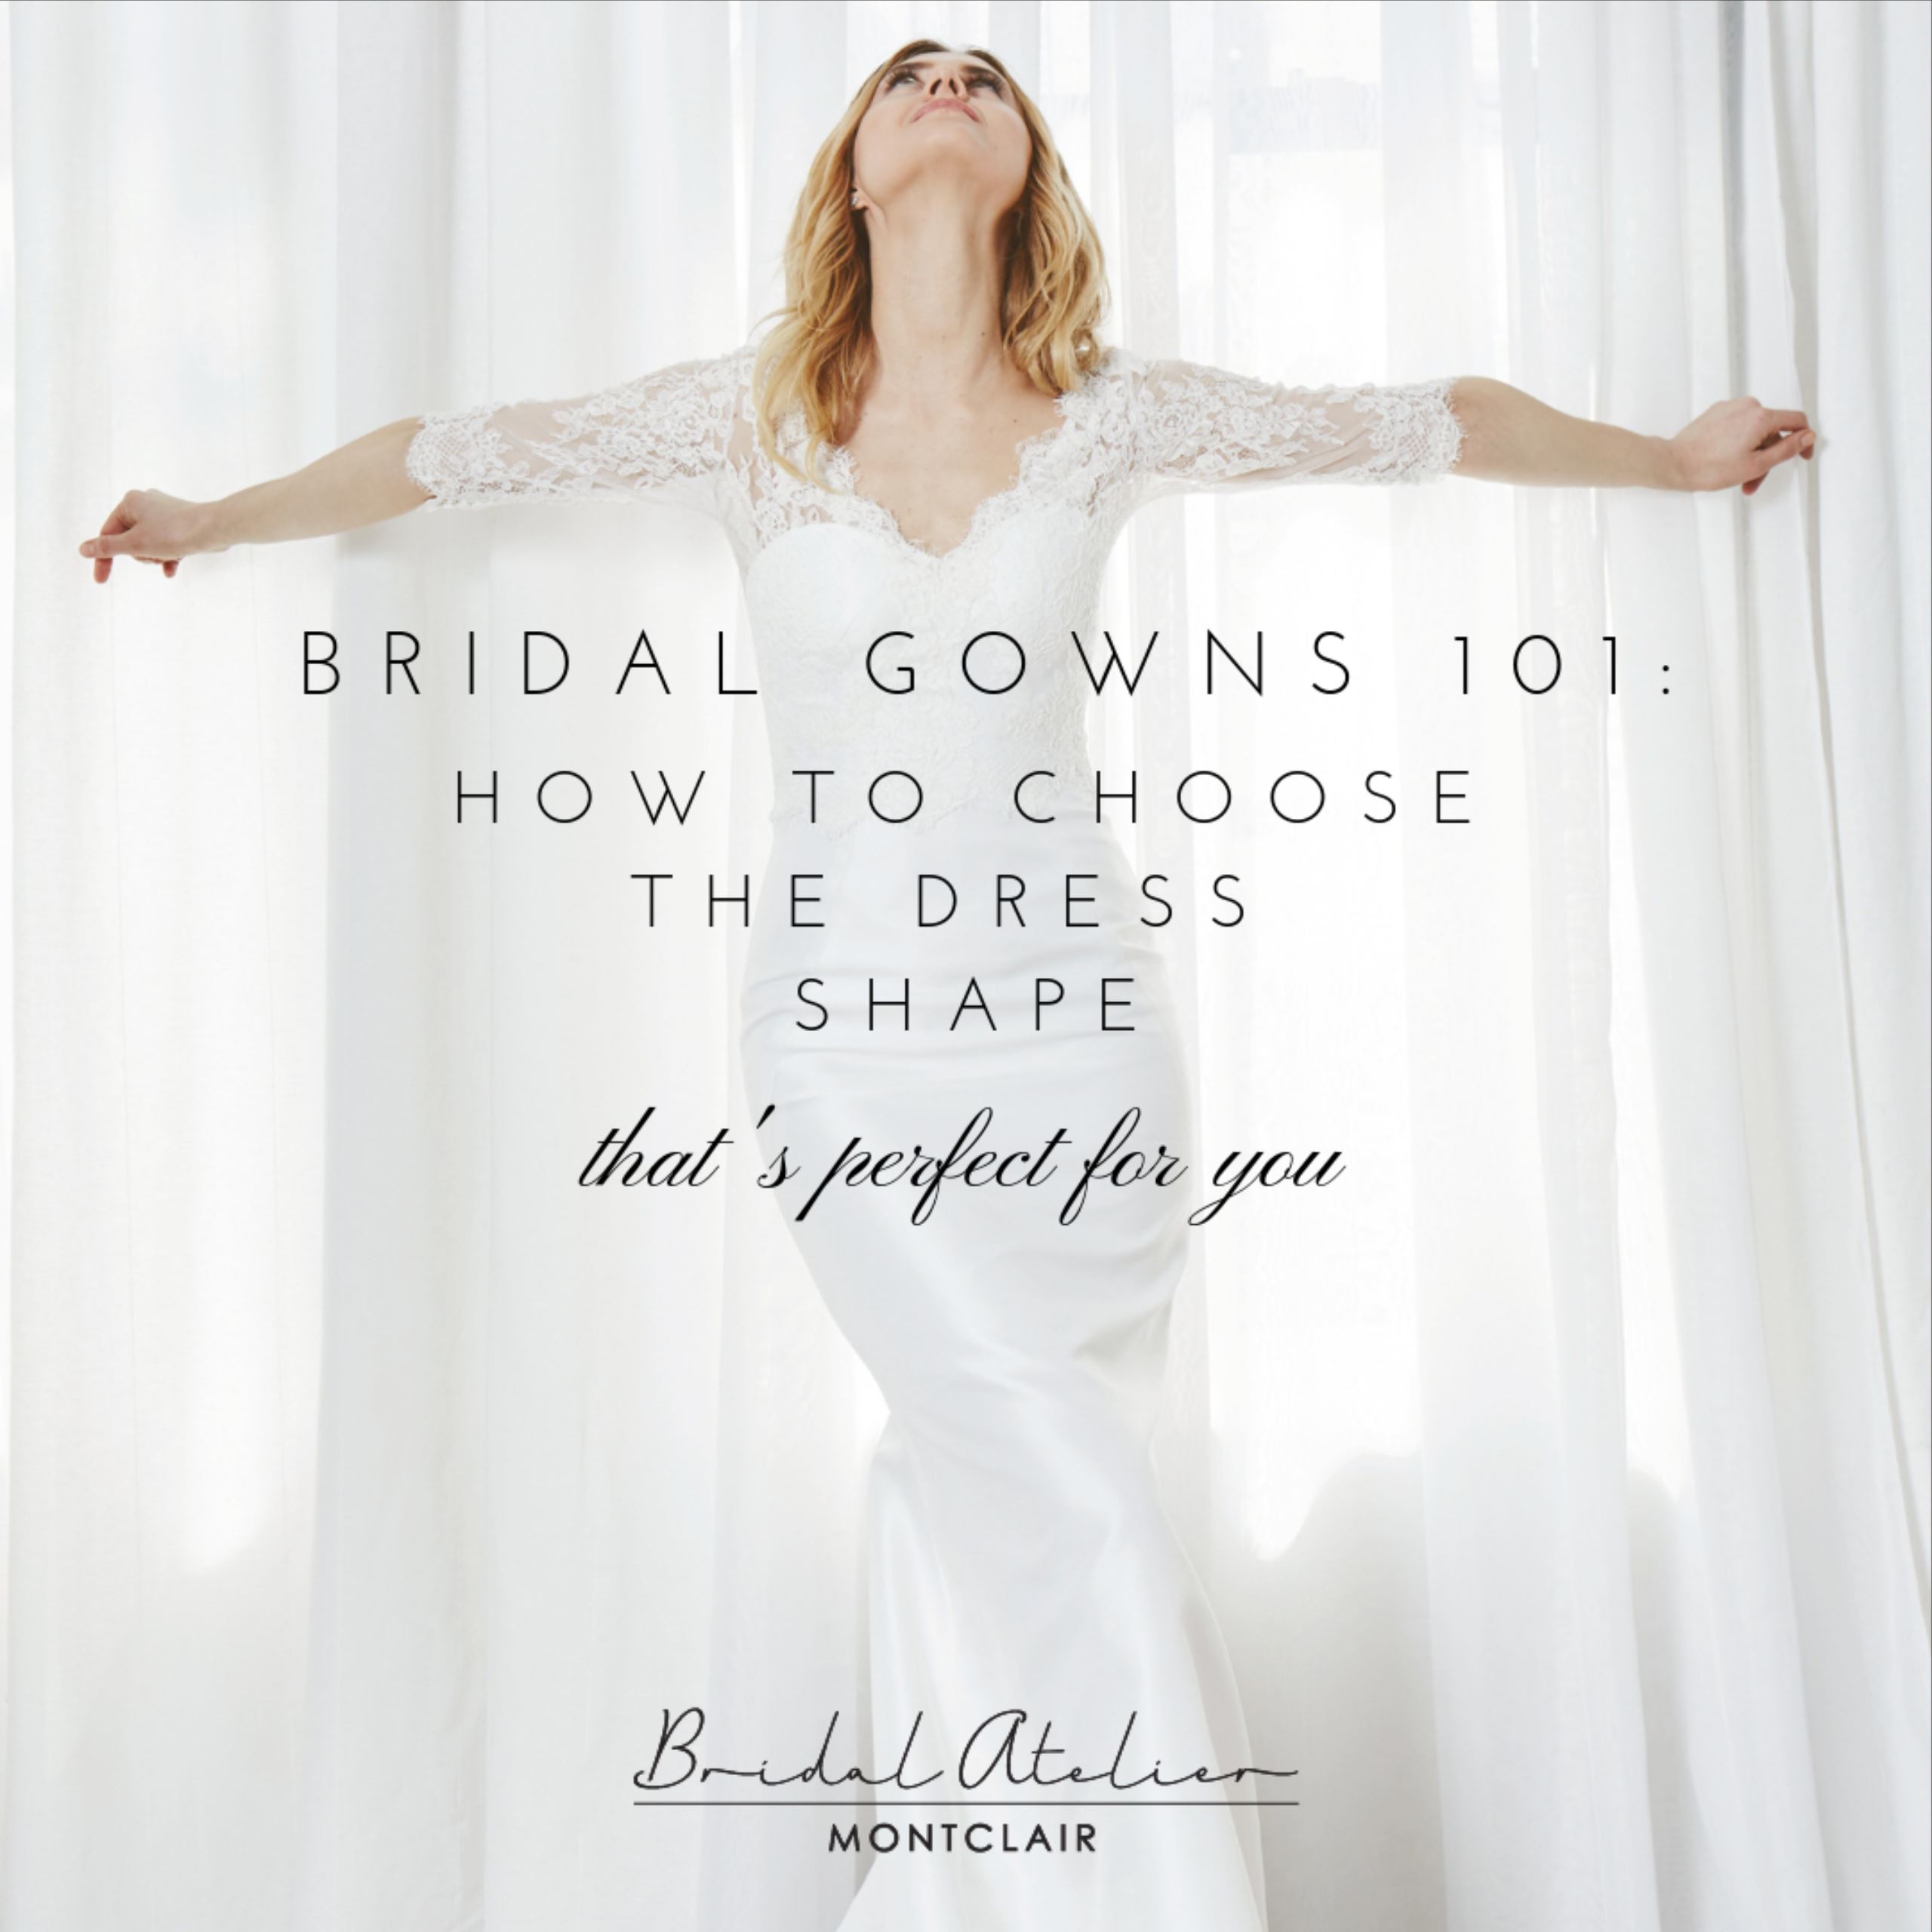 BRIDAL GOWNS 101: HOW TO CHOOSE THE DRESS SHAPE THAT’S PERFECT FOR YOU. Desktop Image